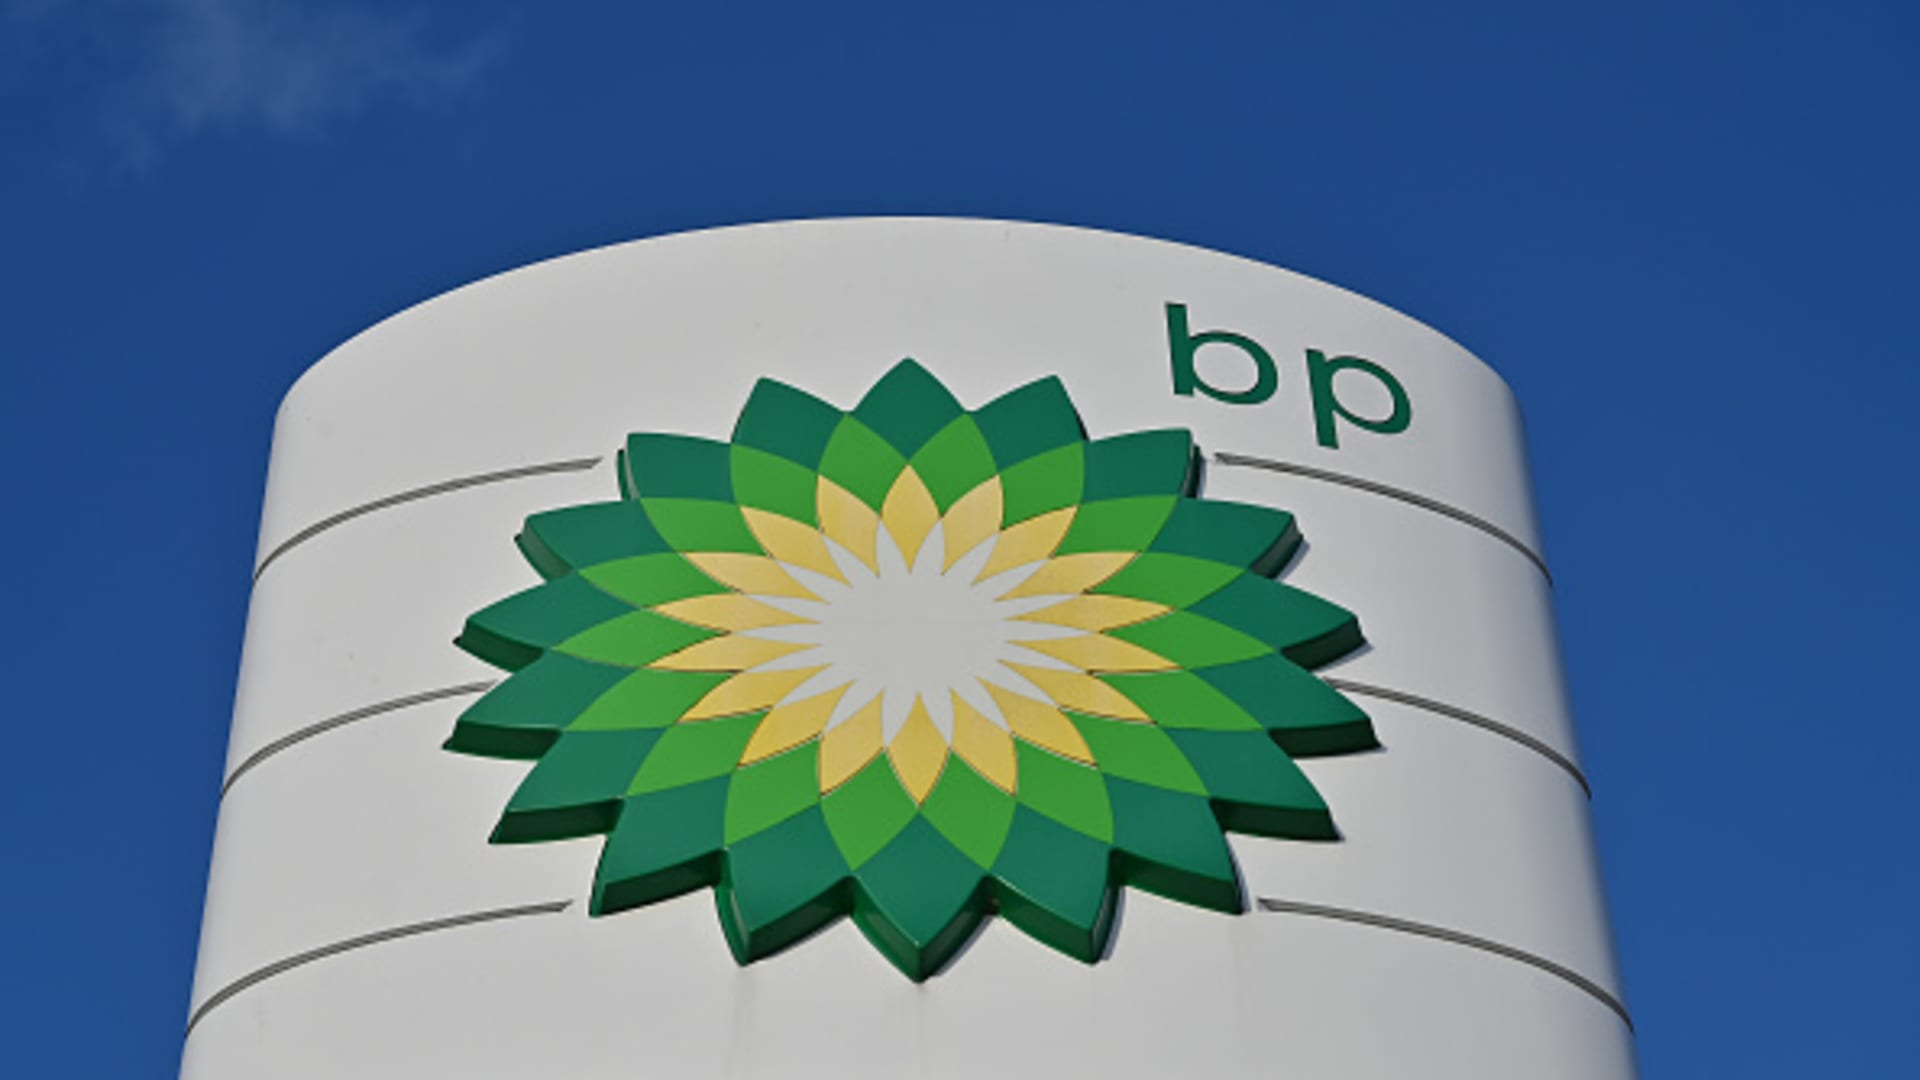 Activist Bluebell believes BP is 50% undervalued compared to peers